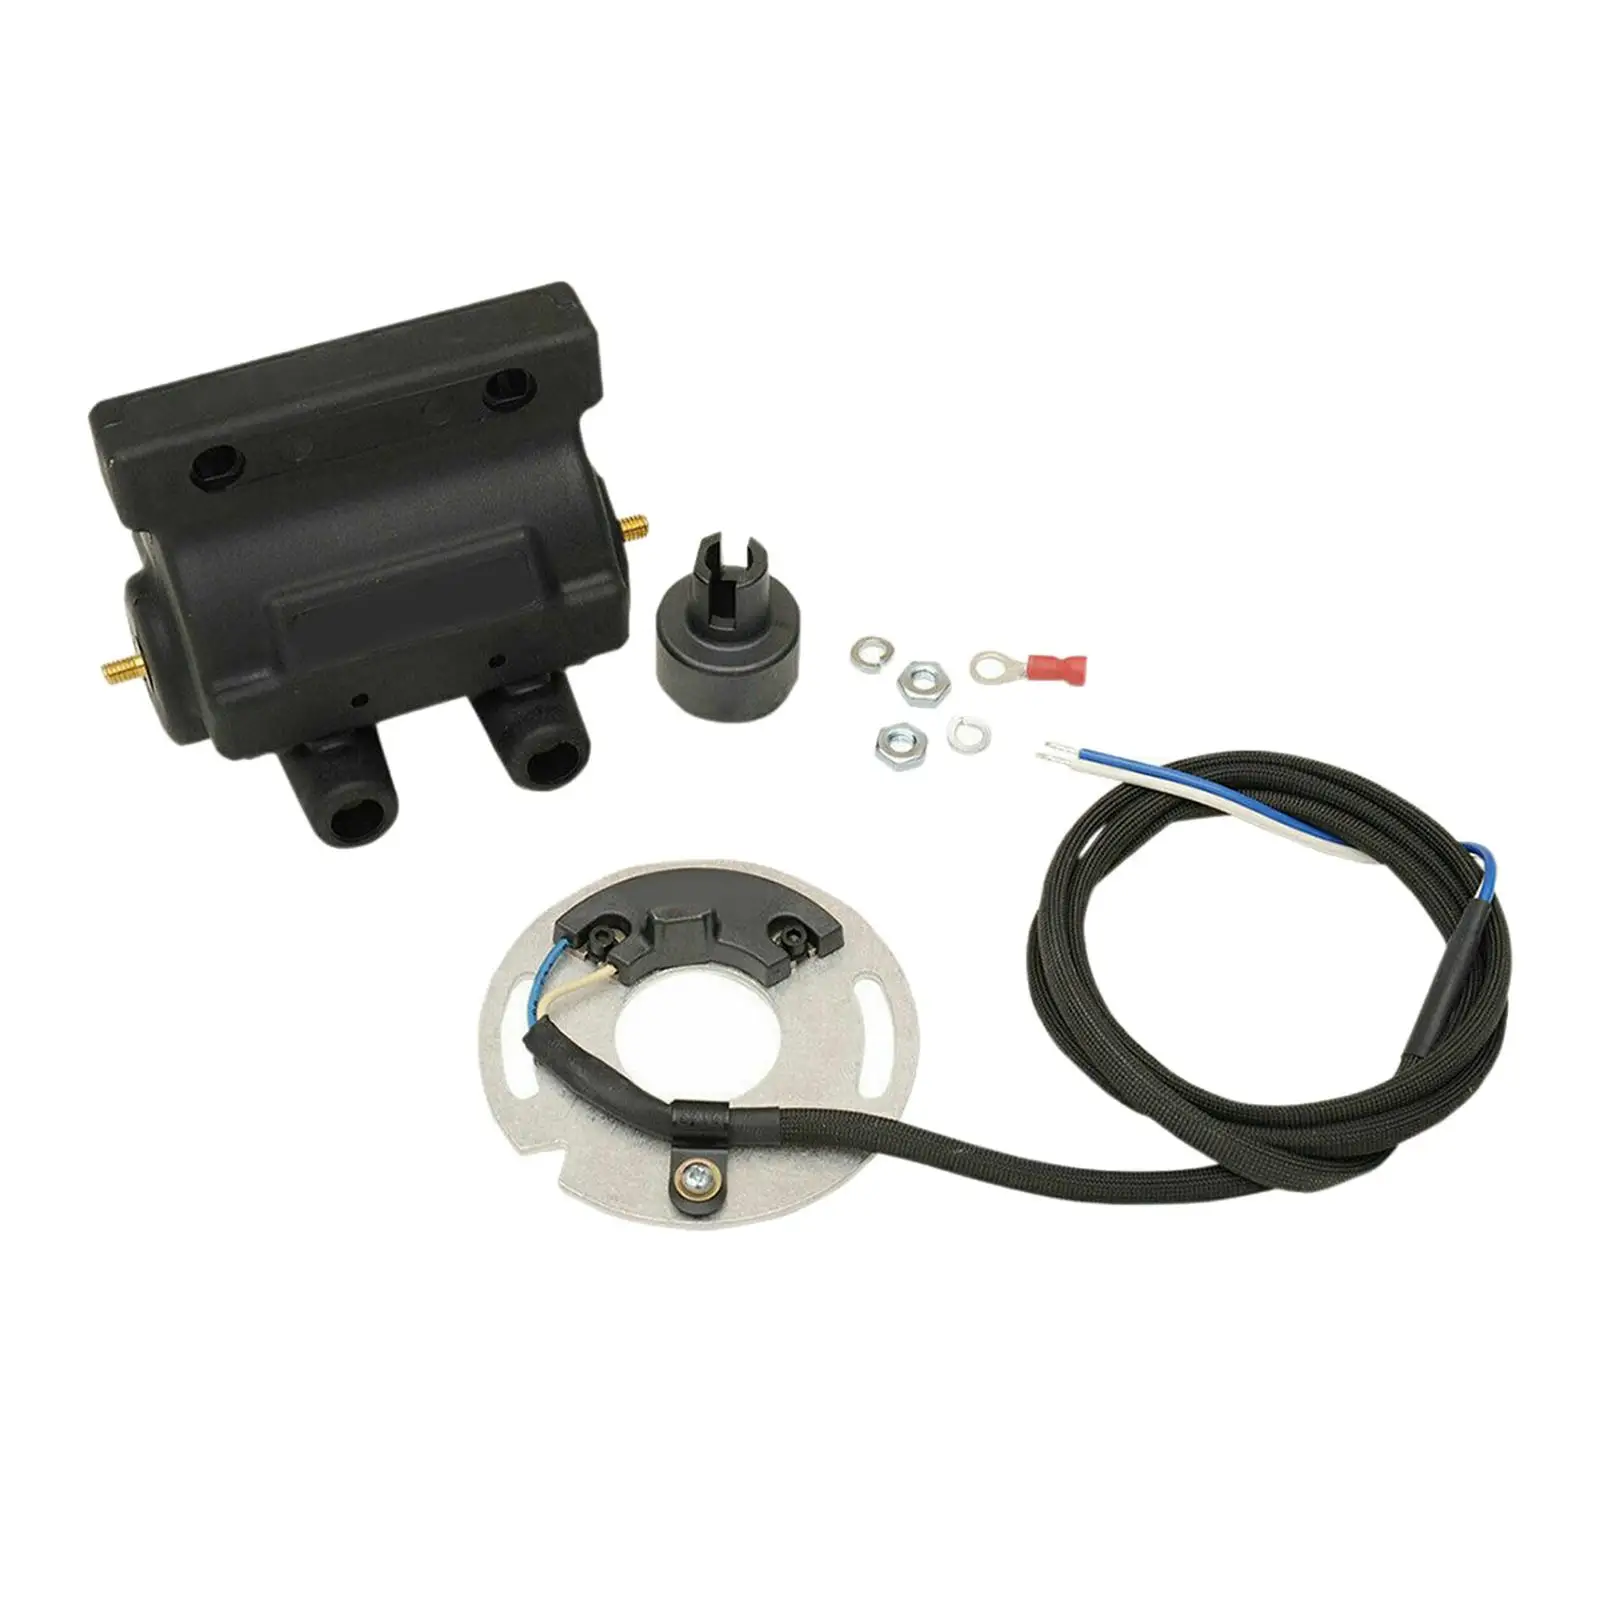 

Ignition Dyna S Dual Fire Dsk61 Supplies Replaces Stable Performance Includes DC71 Coil Kit Accessories for Harley Davidson